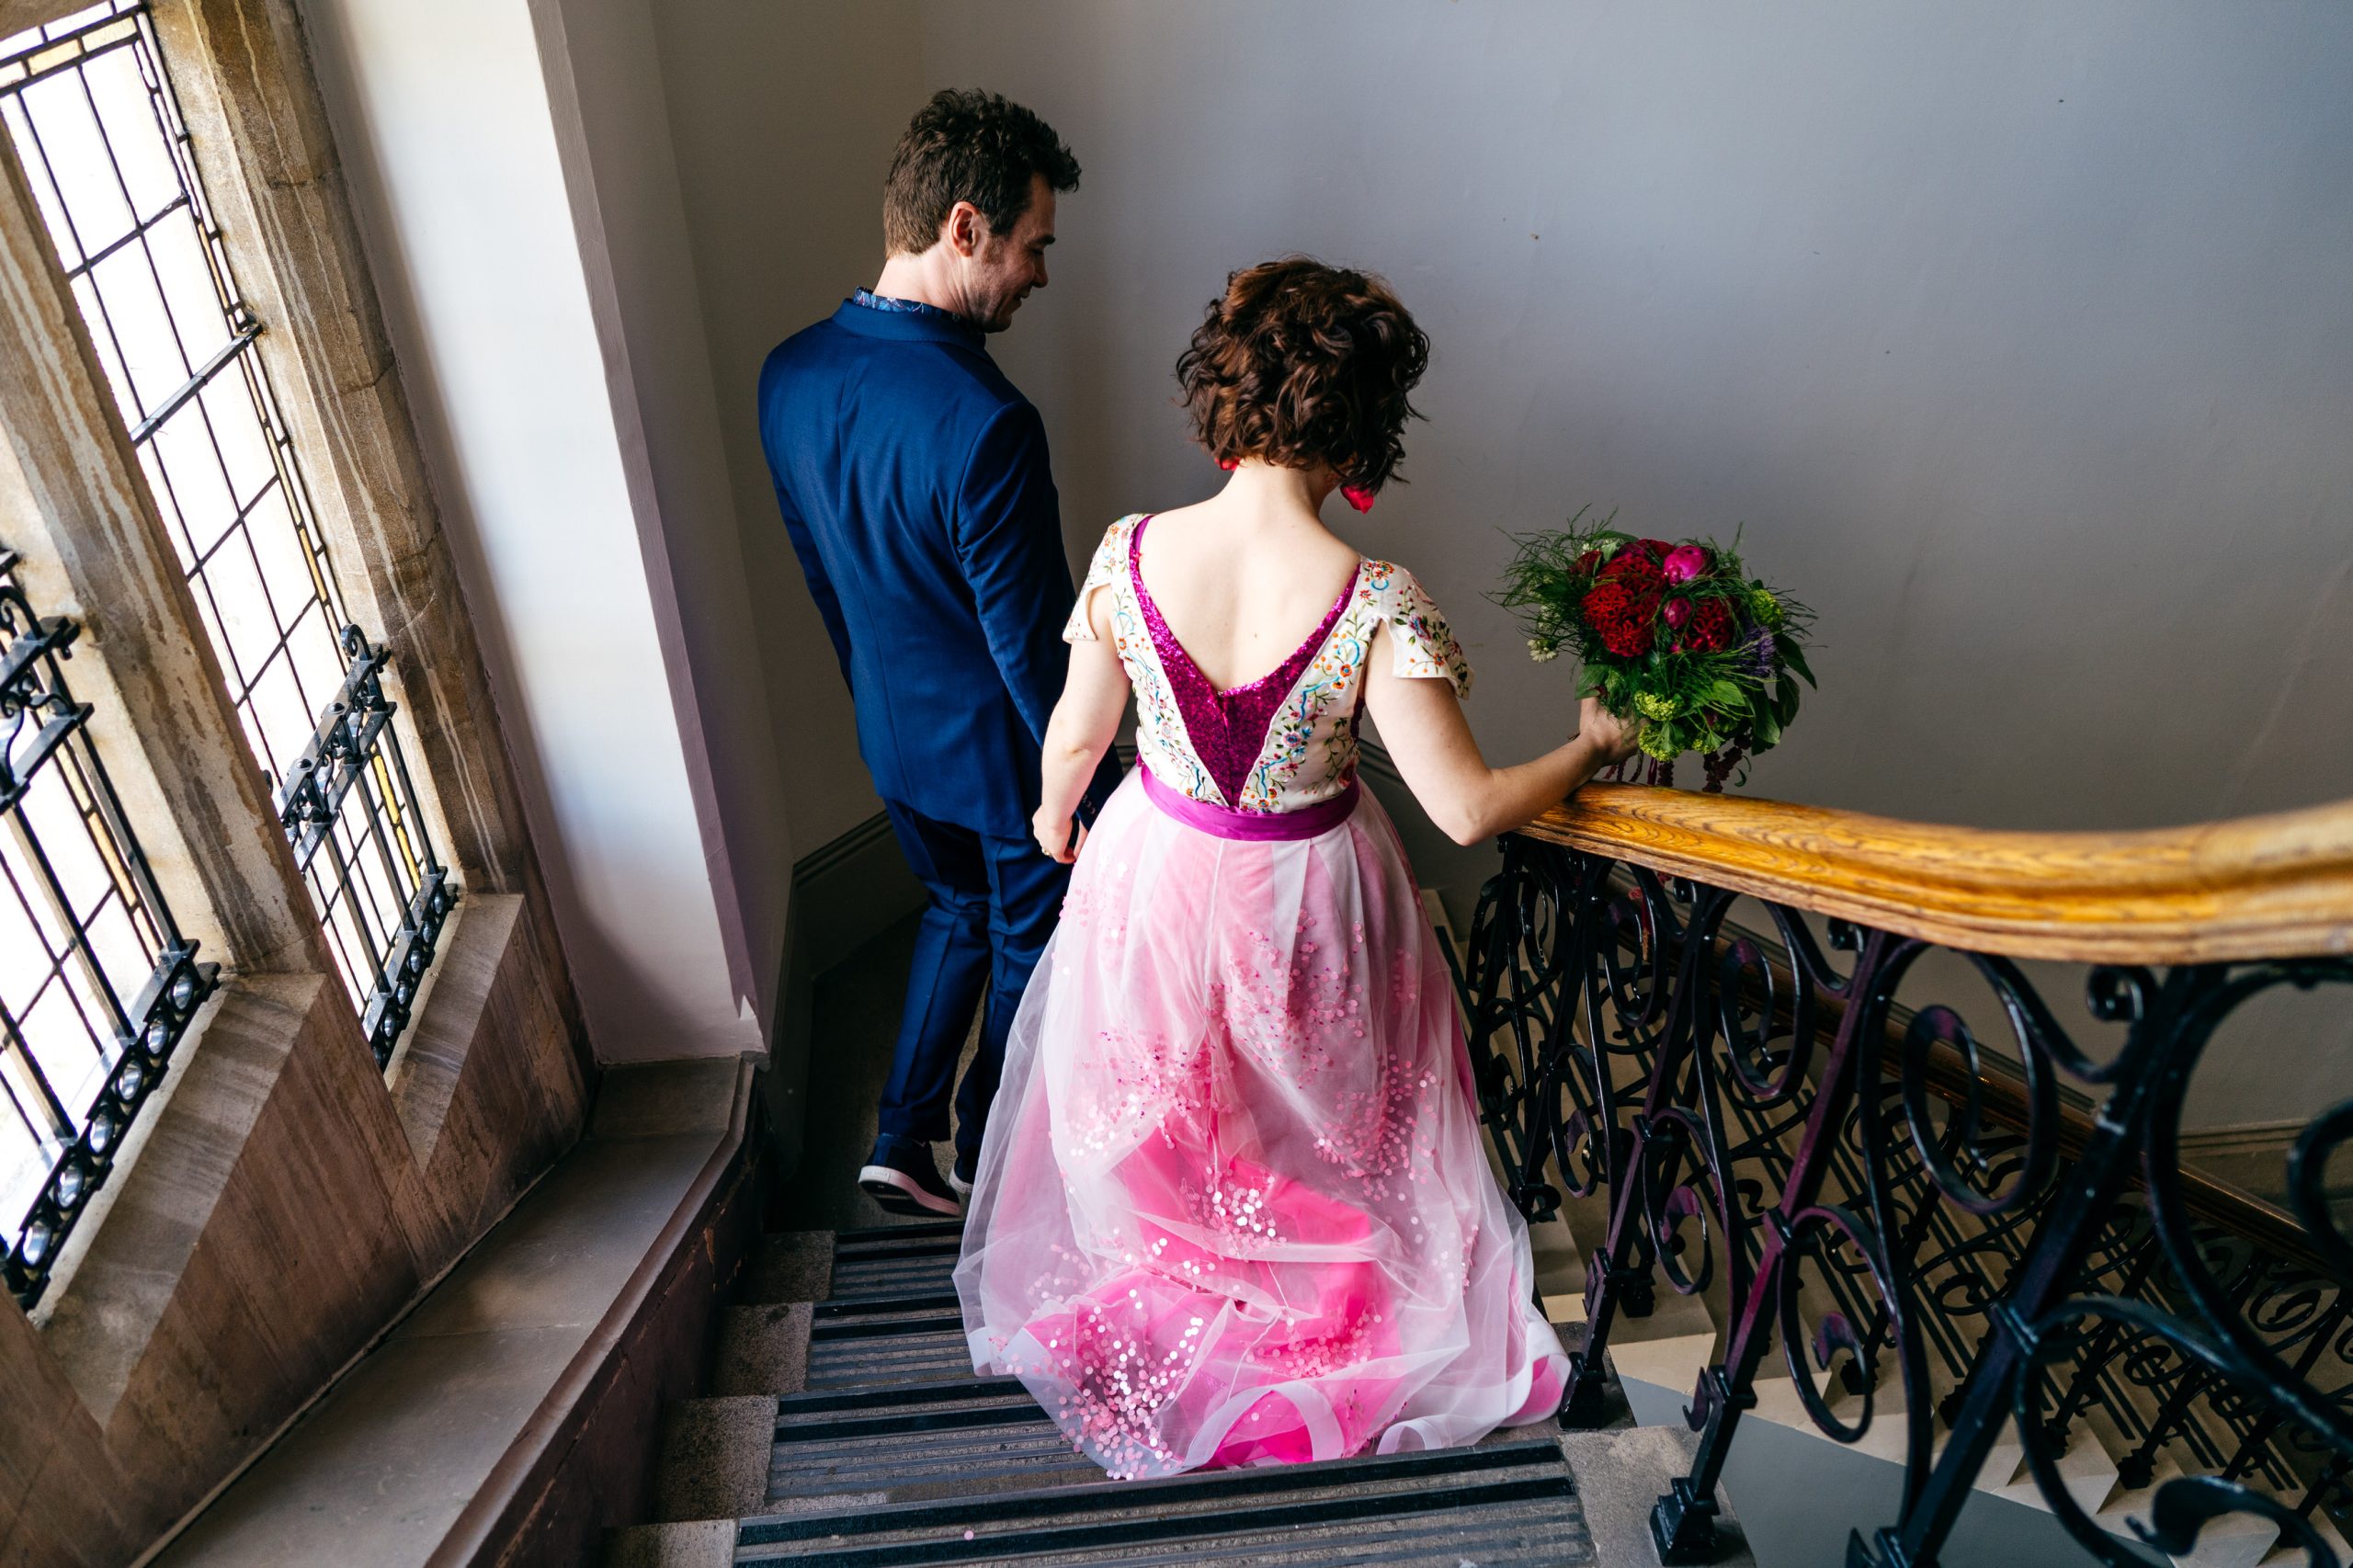 Couple exit ceremony together. Details from bride's dress can clearly be seen with layers of tulle and sequins as they go down the stairs of Winchester Town Hall. 